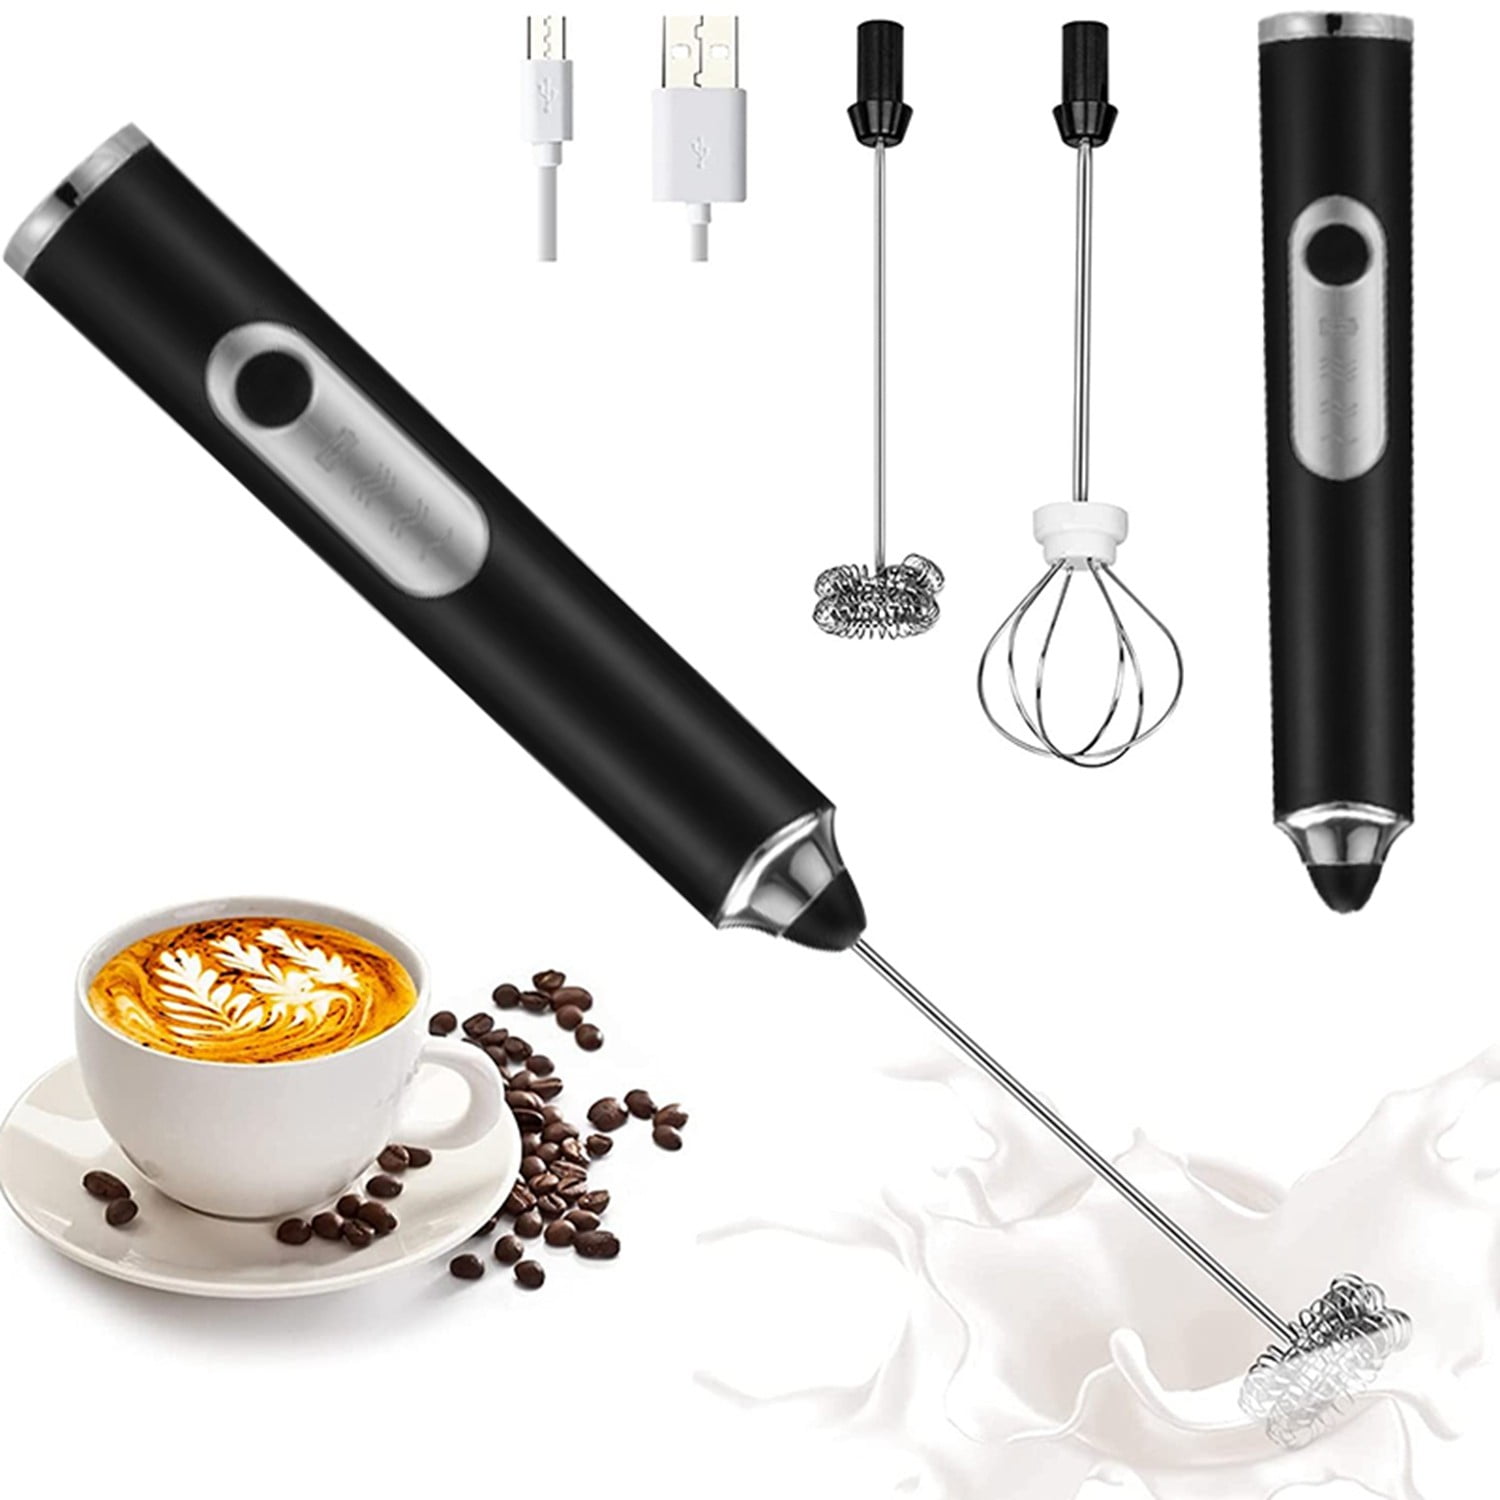 Handheld Milk Frother With Two Heads - USB Rechargeable Battery